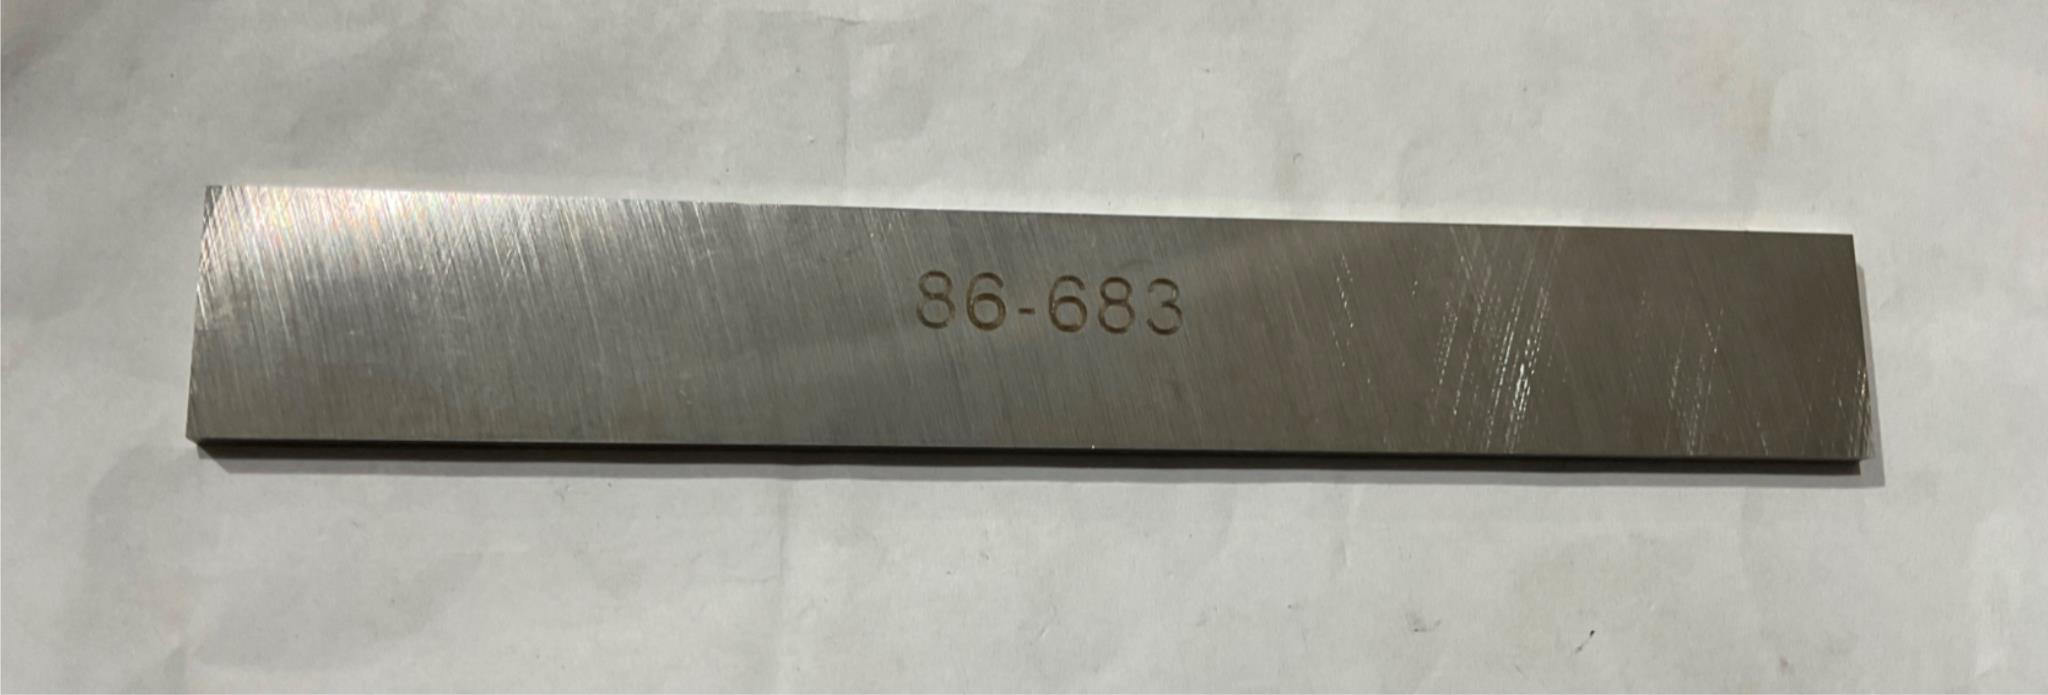 Armstrong 86-683 Cast Alloy Cut Off Blade USA #67